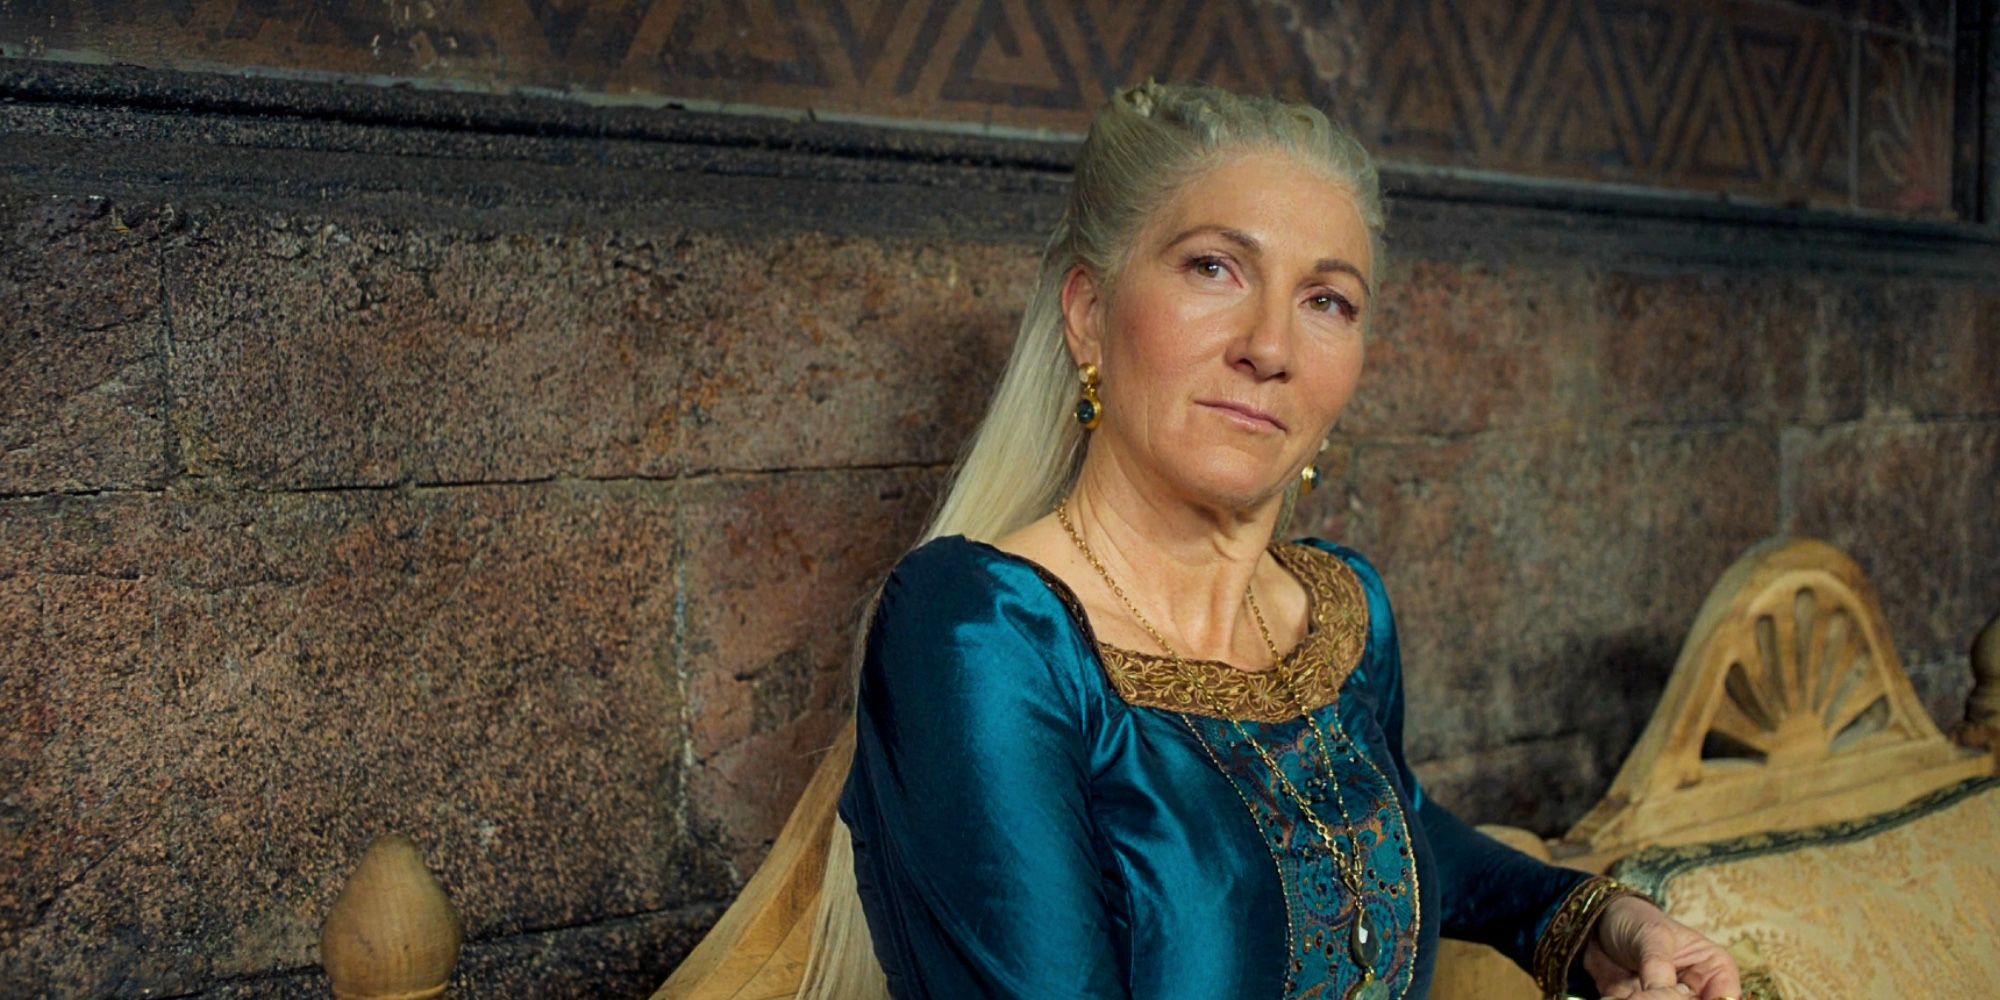 Rhaenys looking smug in a blue dress in House of the Dragon.